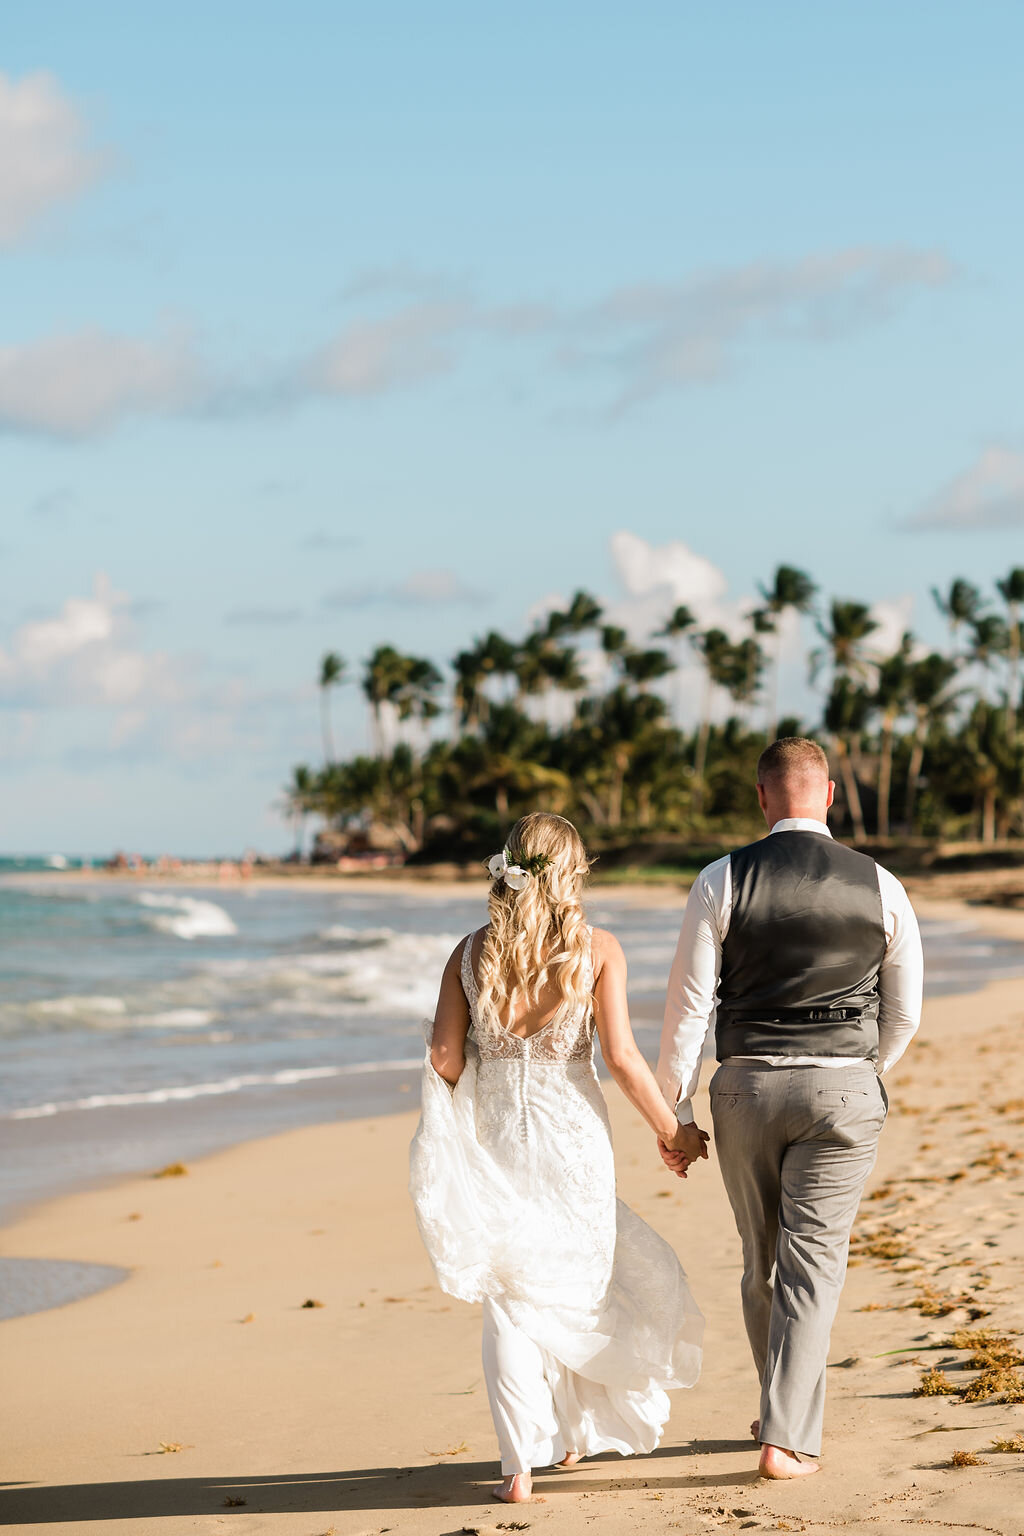 Bride and groom holding hands and walking away on the beach